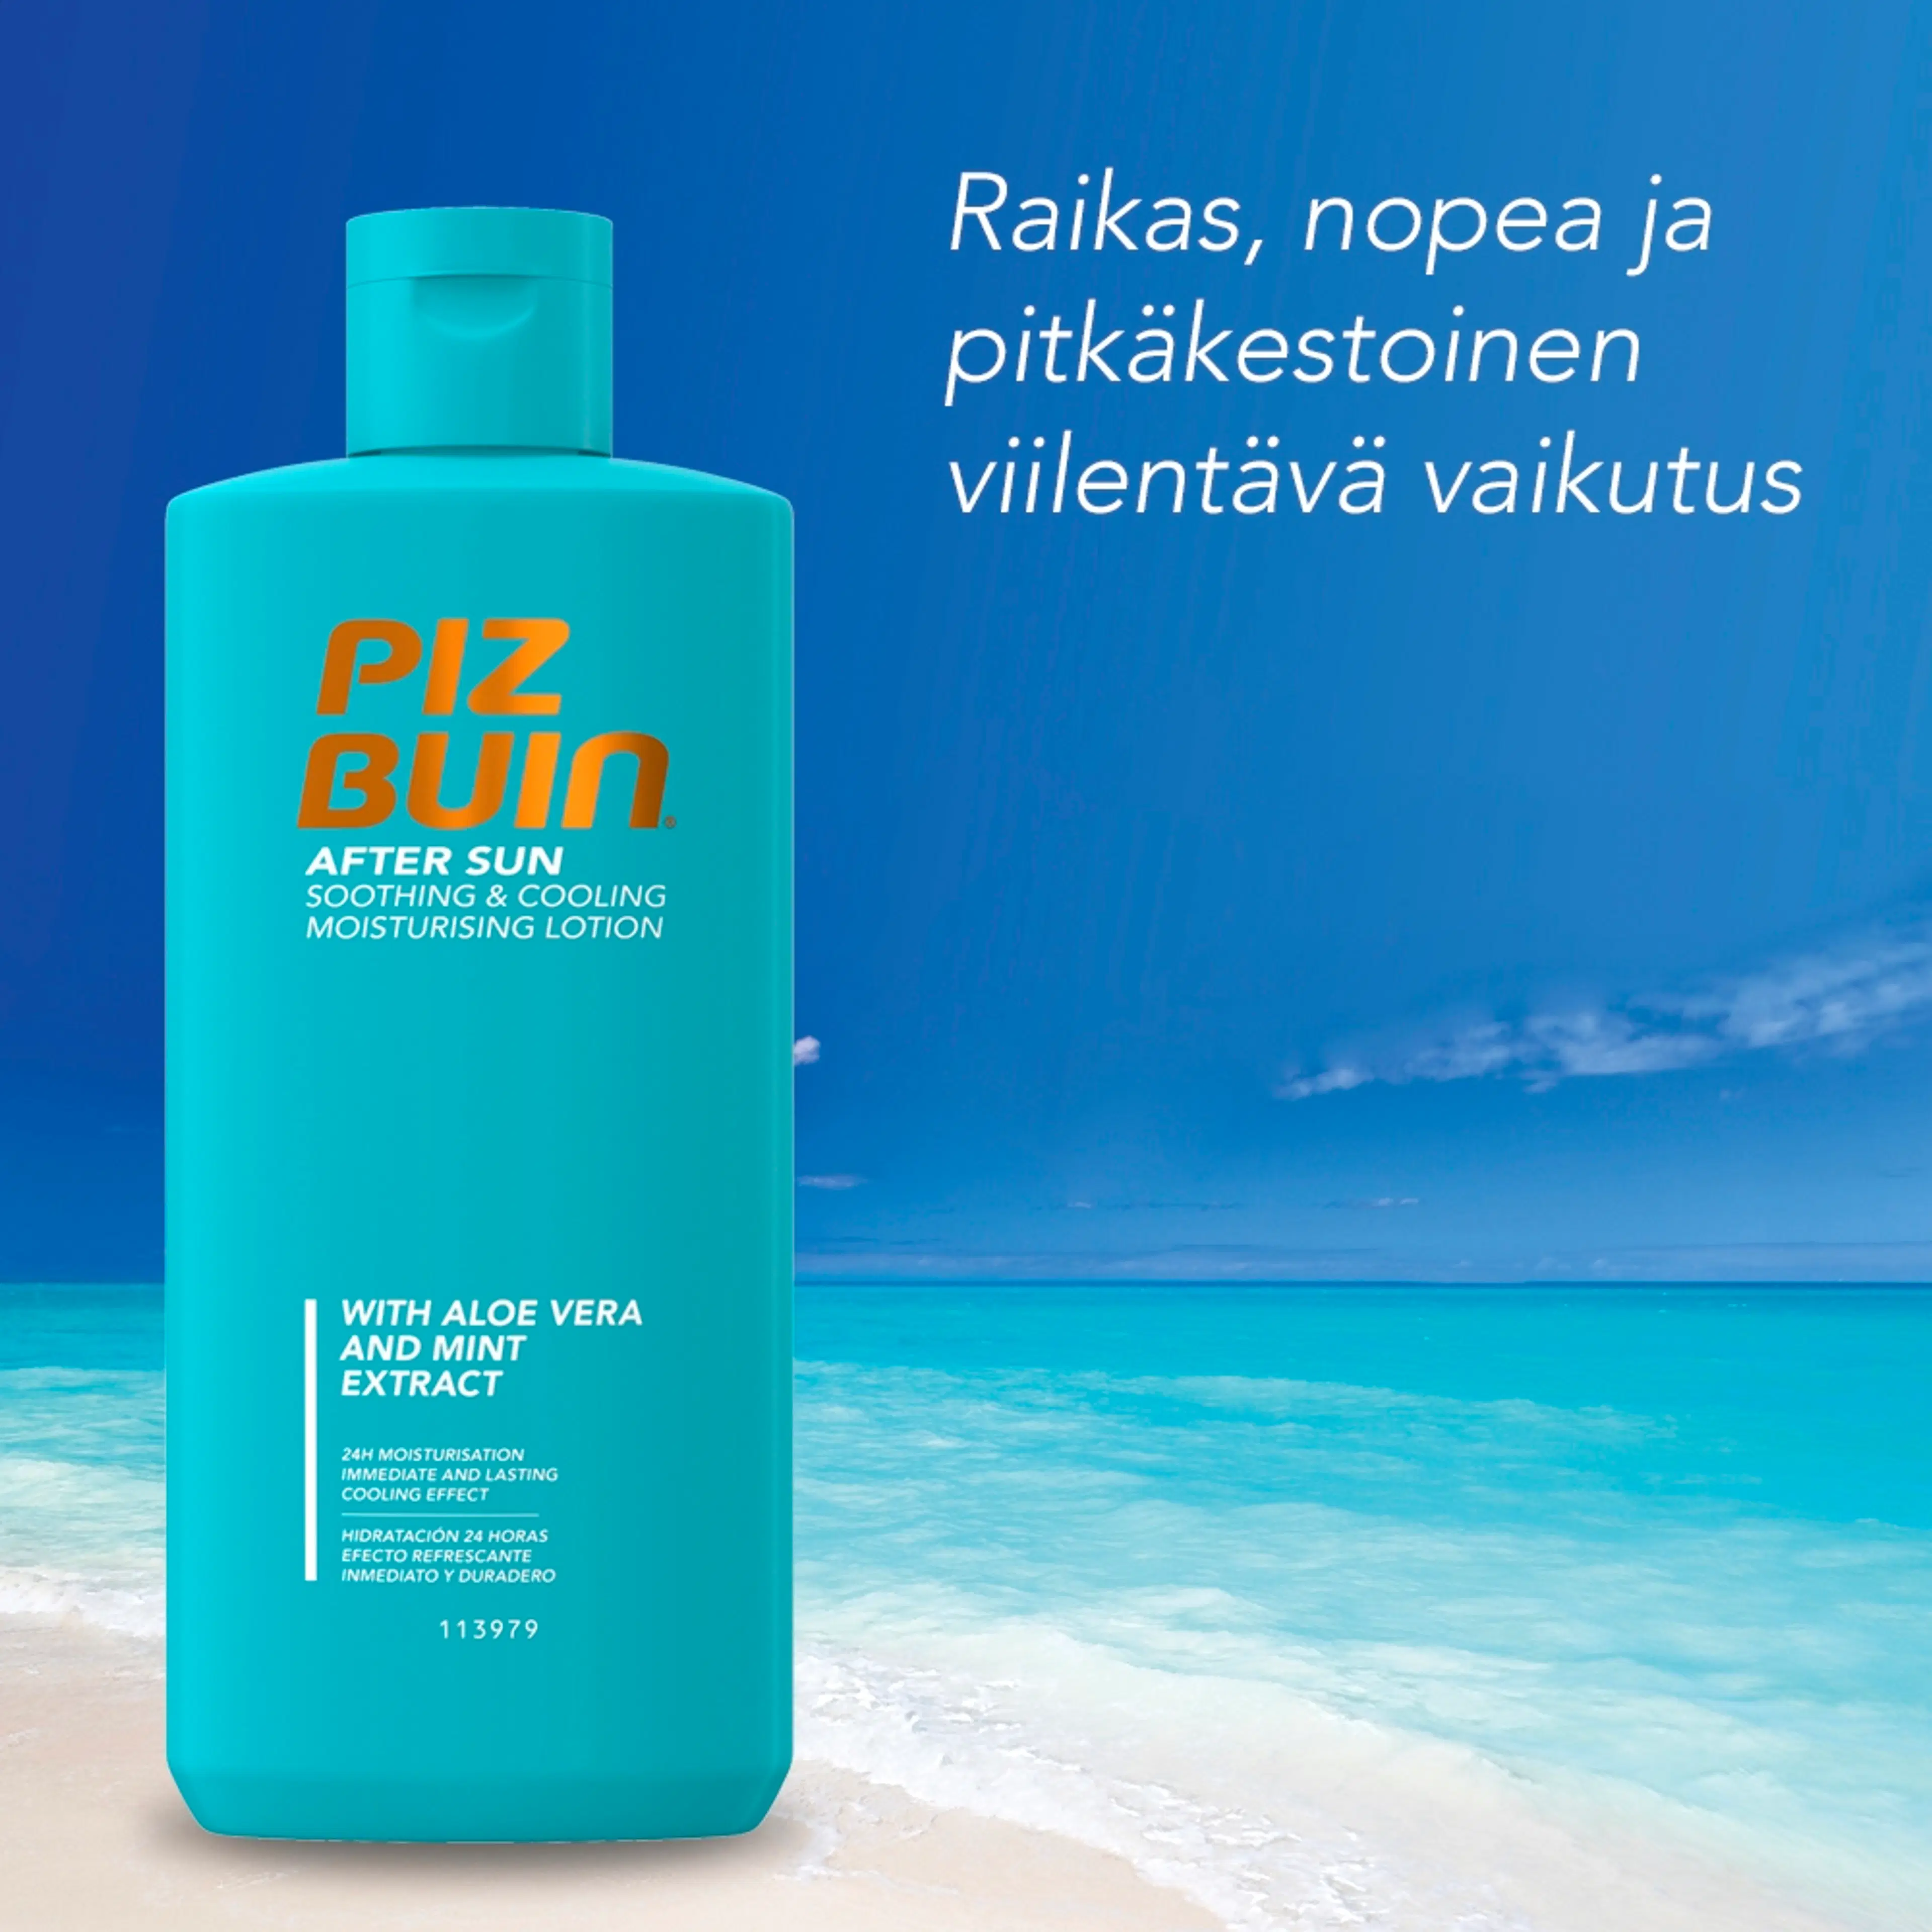 Piz Buin After Sun Soothing & Cooling Voide 200ml